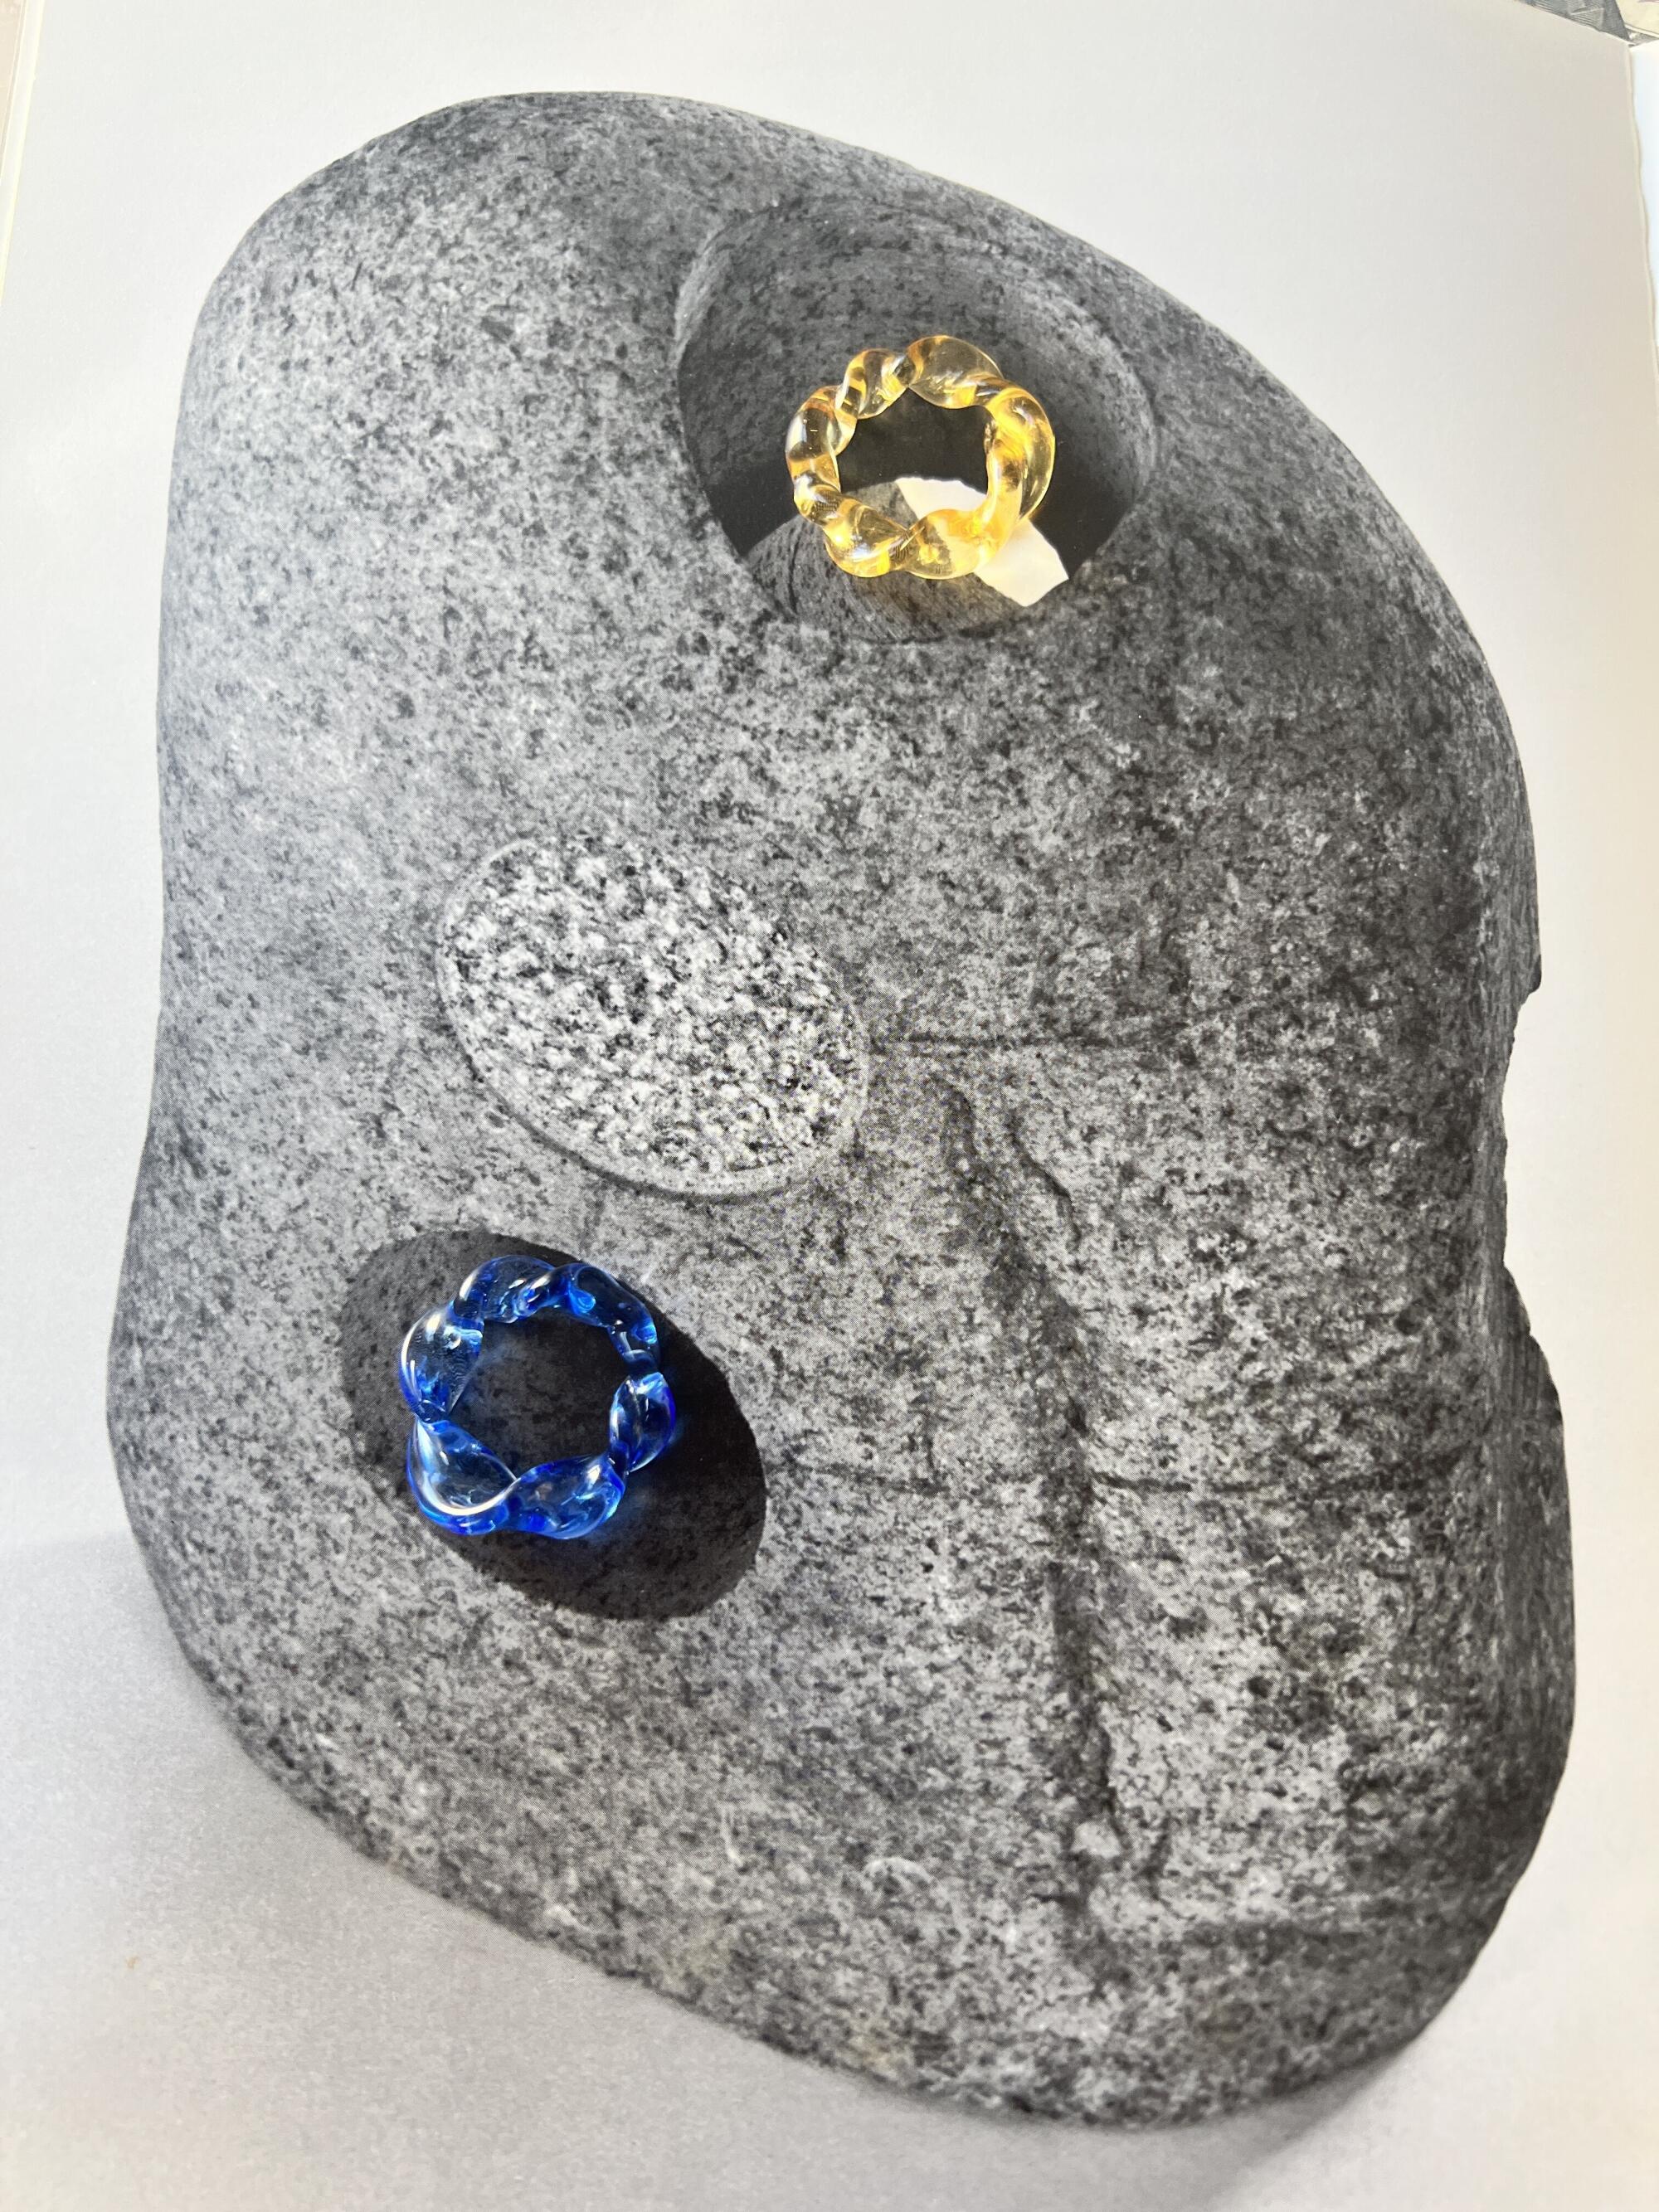 Two glass rings in yellow and blue by Georgia ic25 displayed in rock-like packaging